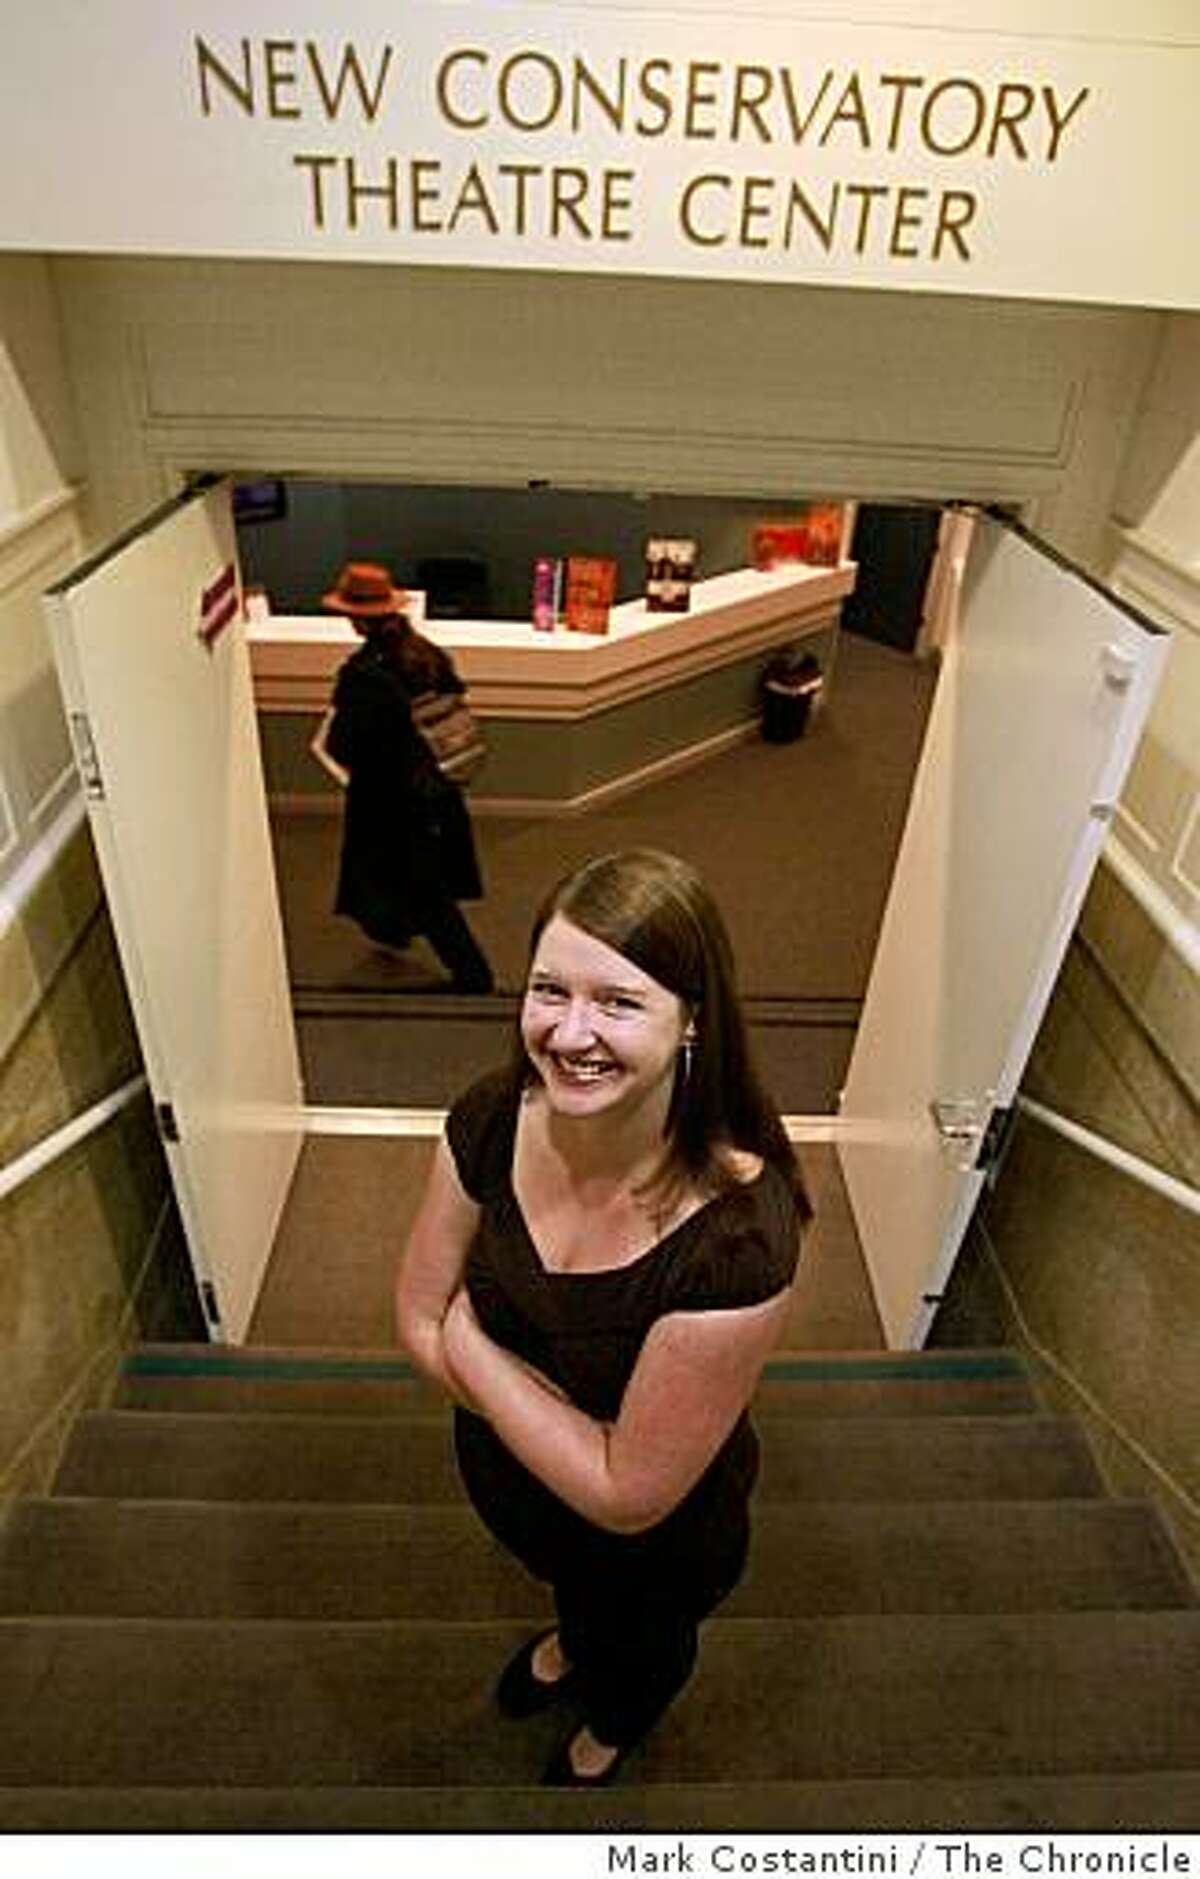 Jefferson Award Winner Sarah Staley poses at the New Conservatory Theatre Center in San Francisco, Calif. on Wednesday, September 10, 2008.